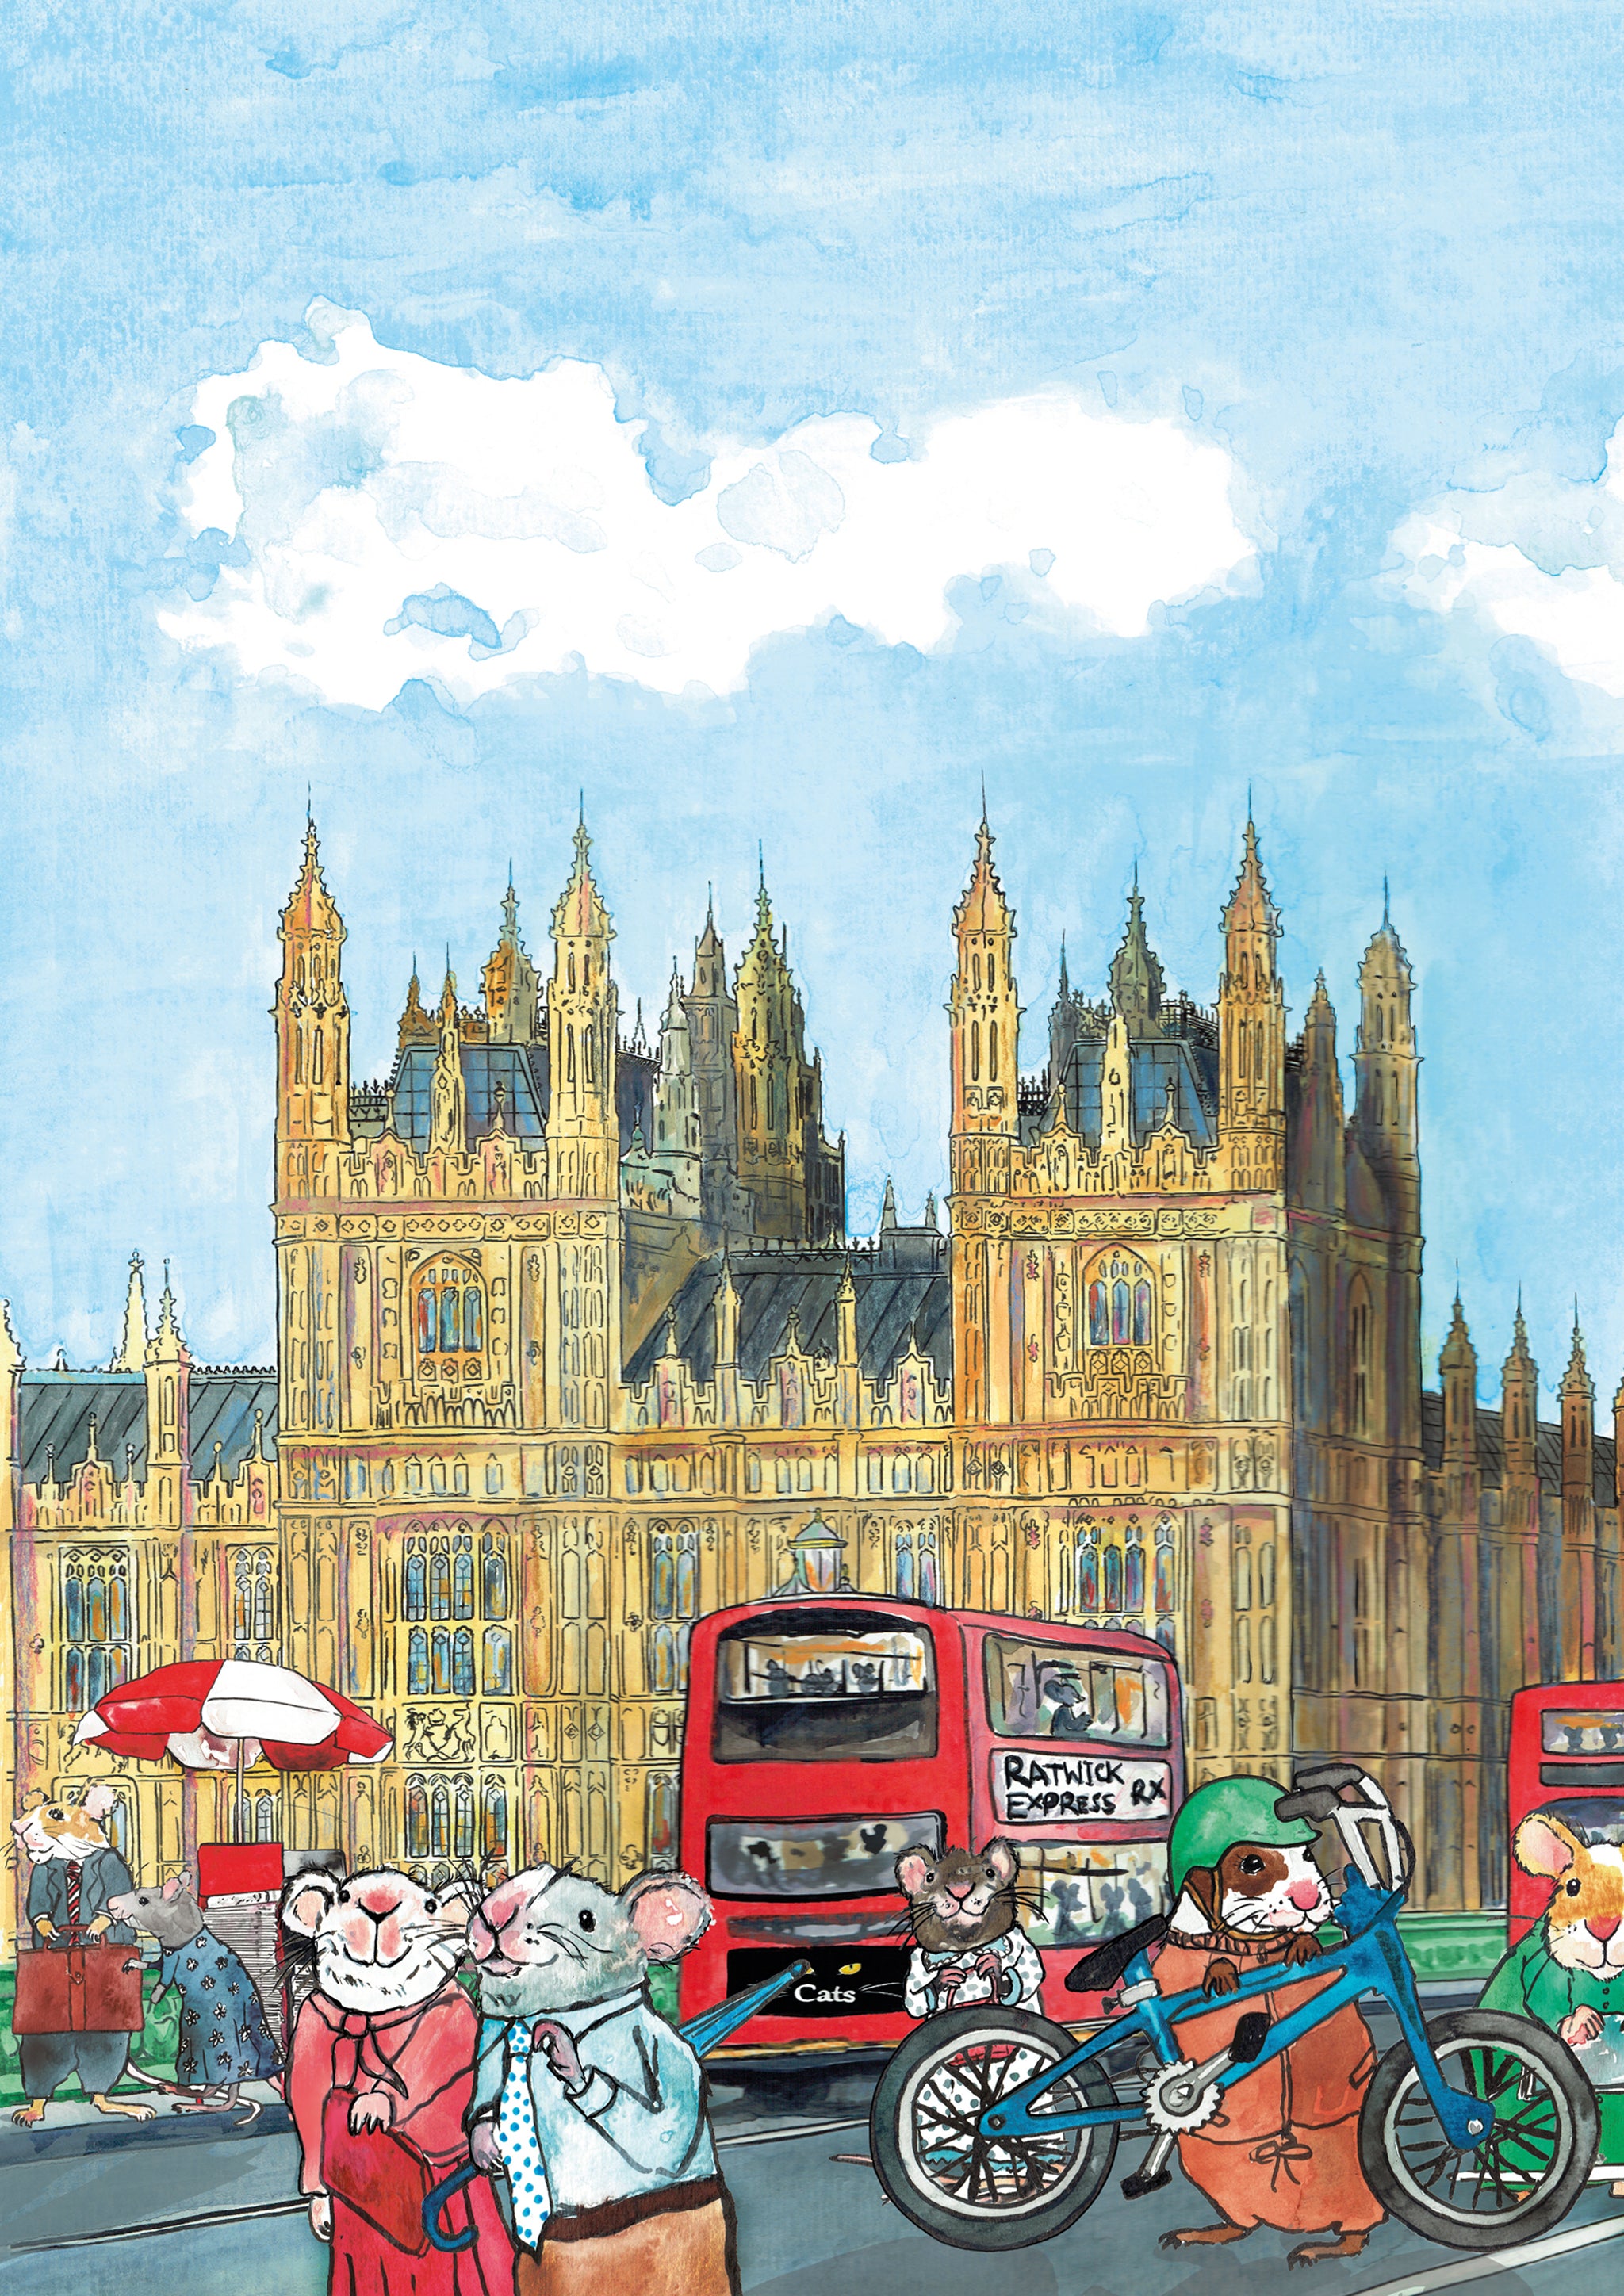 Big Hen and the Mouse of Parliament features original watercolour artwork of the iconic Palace of Westminster and Big Ben clocktower. Big Hen and the Mouse of Parliament features original watercolour artwork of the iconic Palace of Westminster and Big Ben clocktower. 